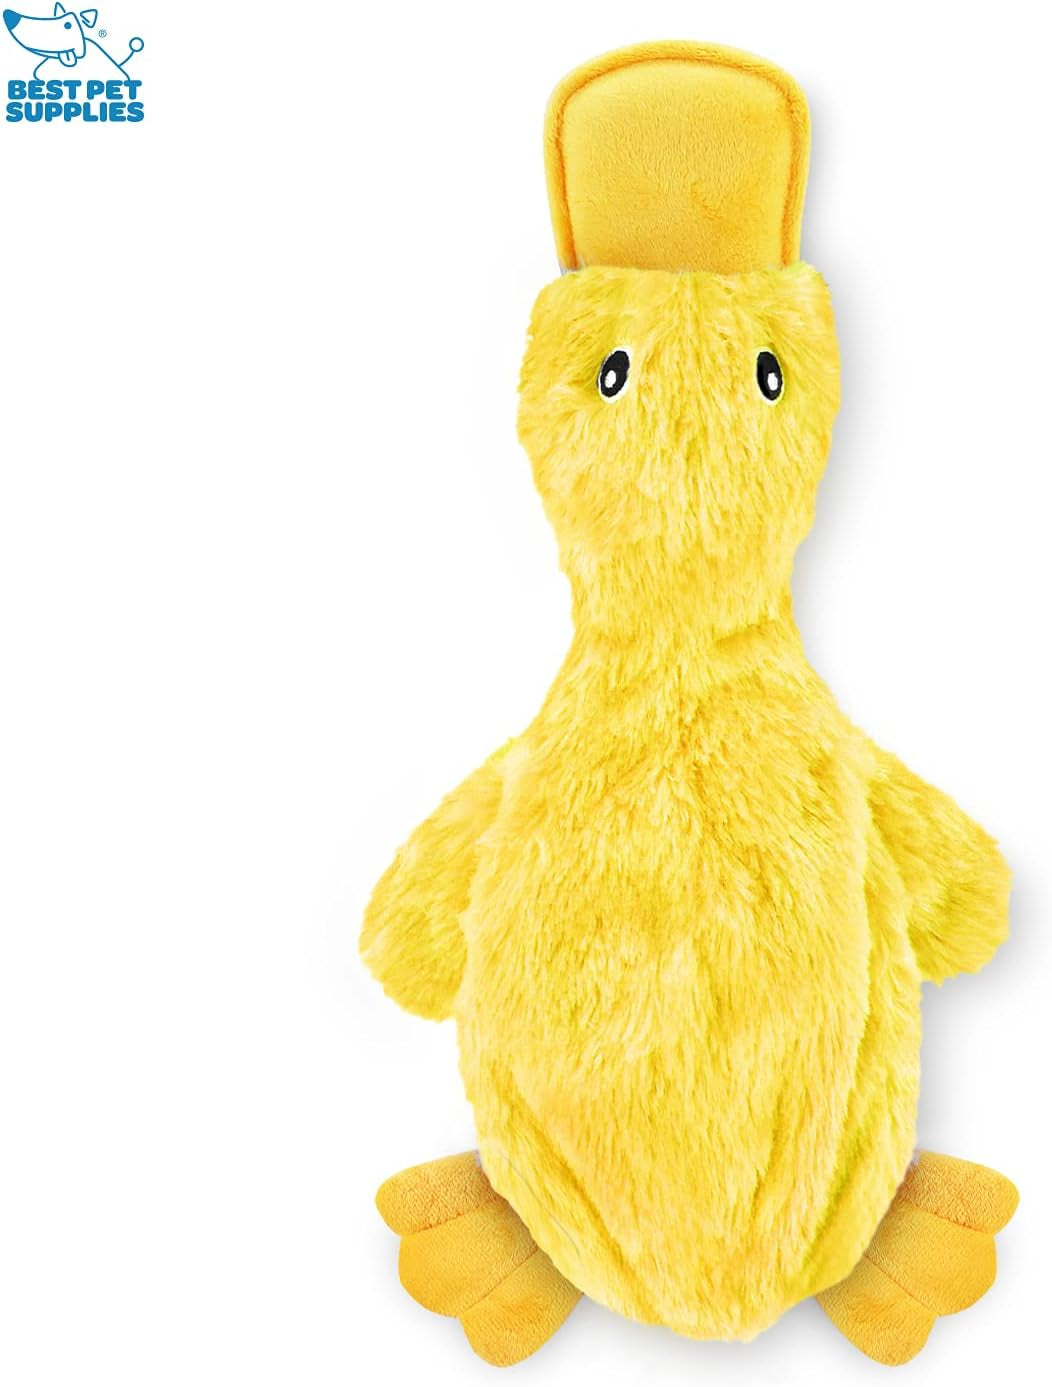 Crinkle Dog Toy for Small, Medium, and Large Breeds, Cute No Stuffing Duck with Soft Squeaker, Fun for Indoor Puppies and Senior Pups, Plush No Mess Chew and Play - Yellow